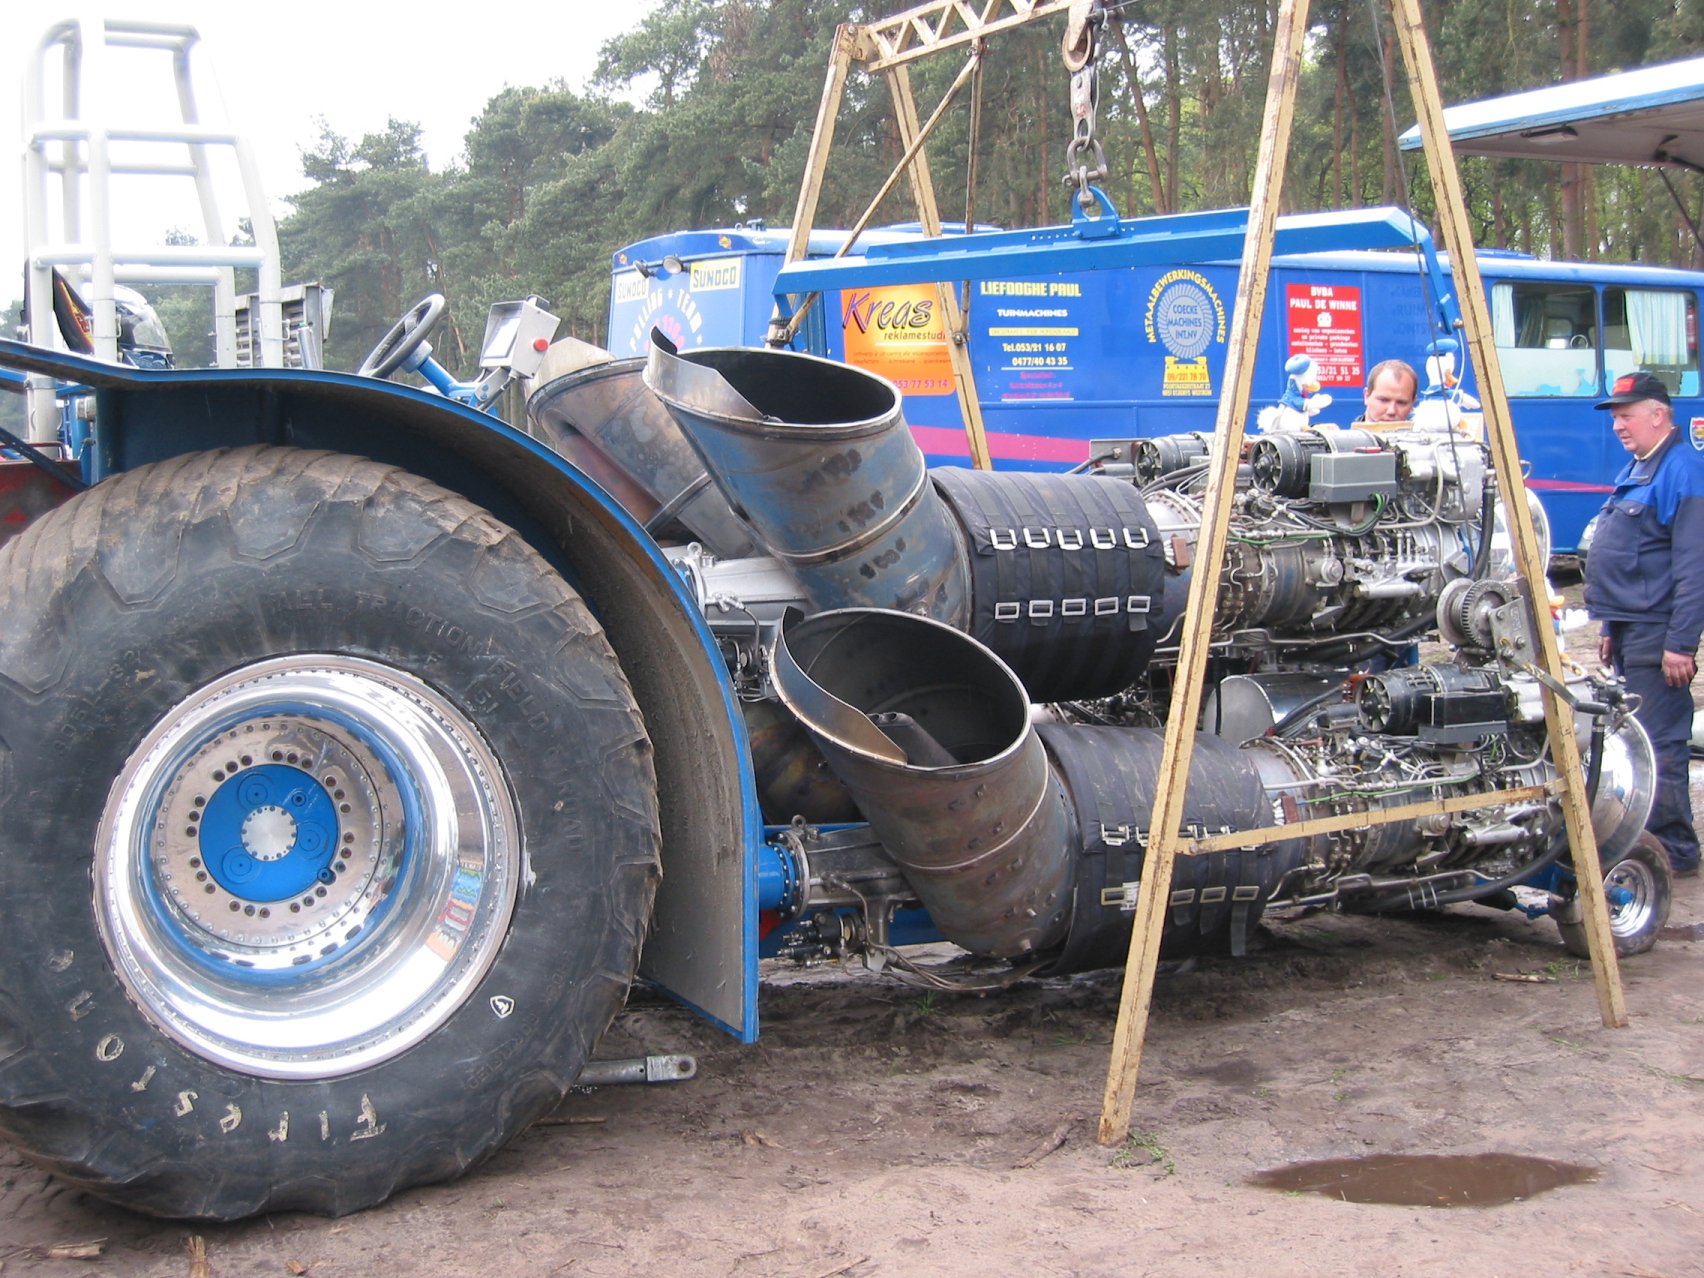 tractor pulling, Race, Racing, Hot, Rod, Rods, Tractor, Engine, Jet Wallpaper